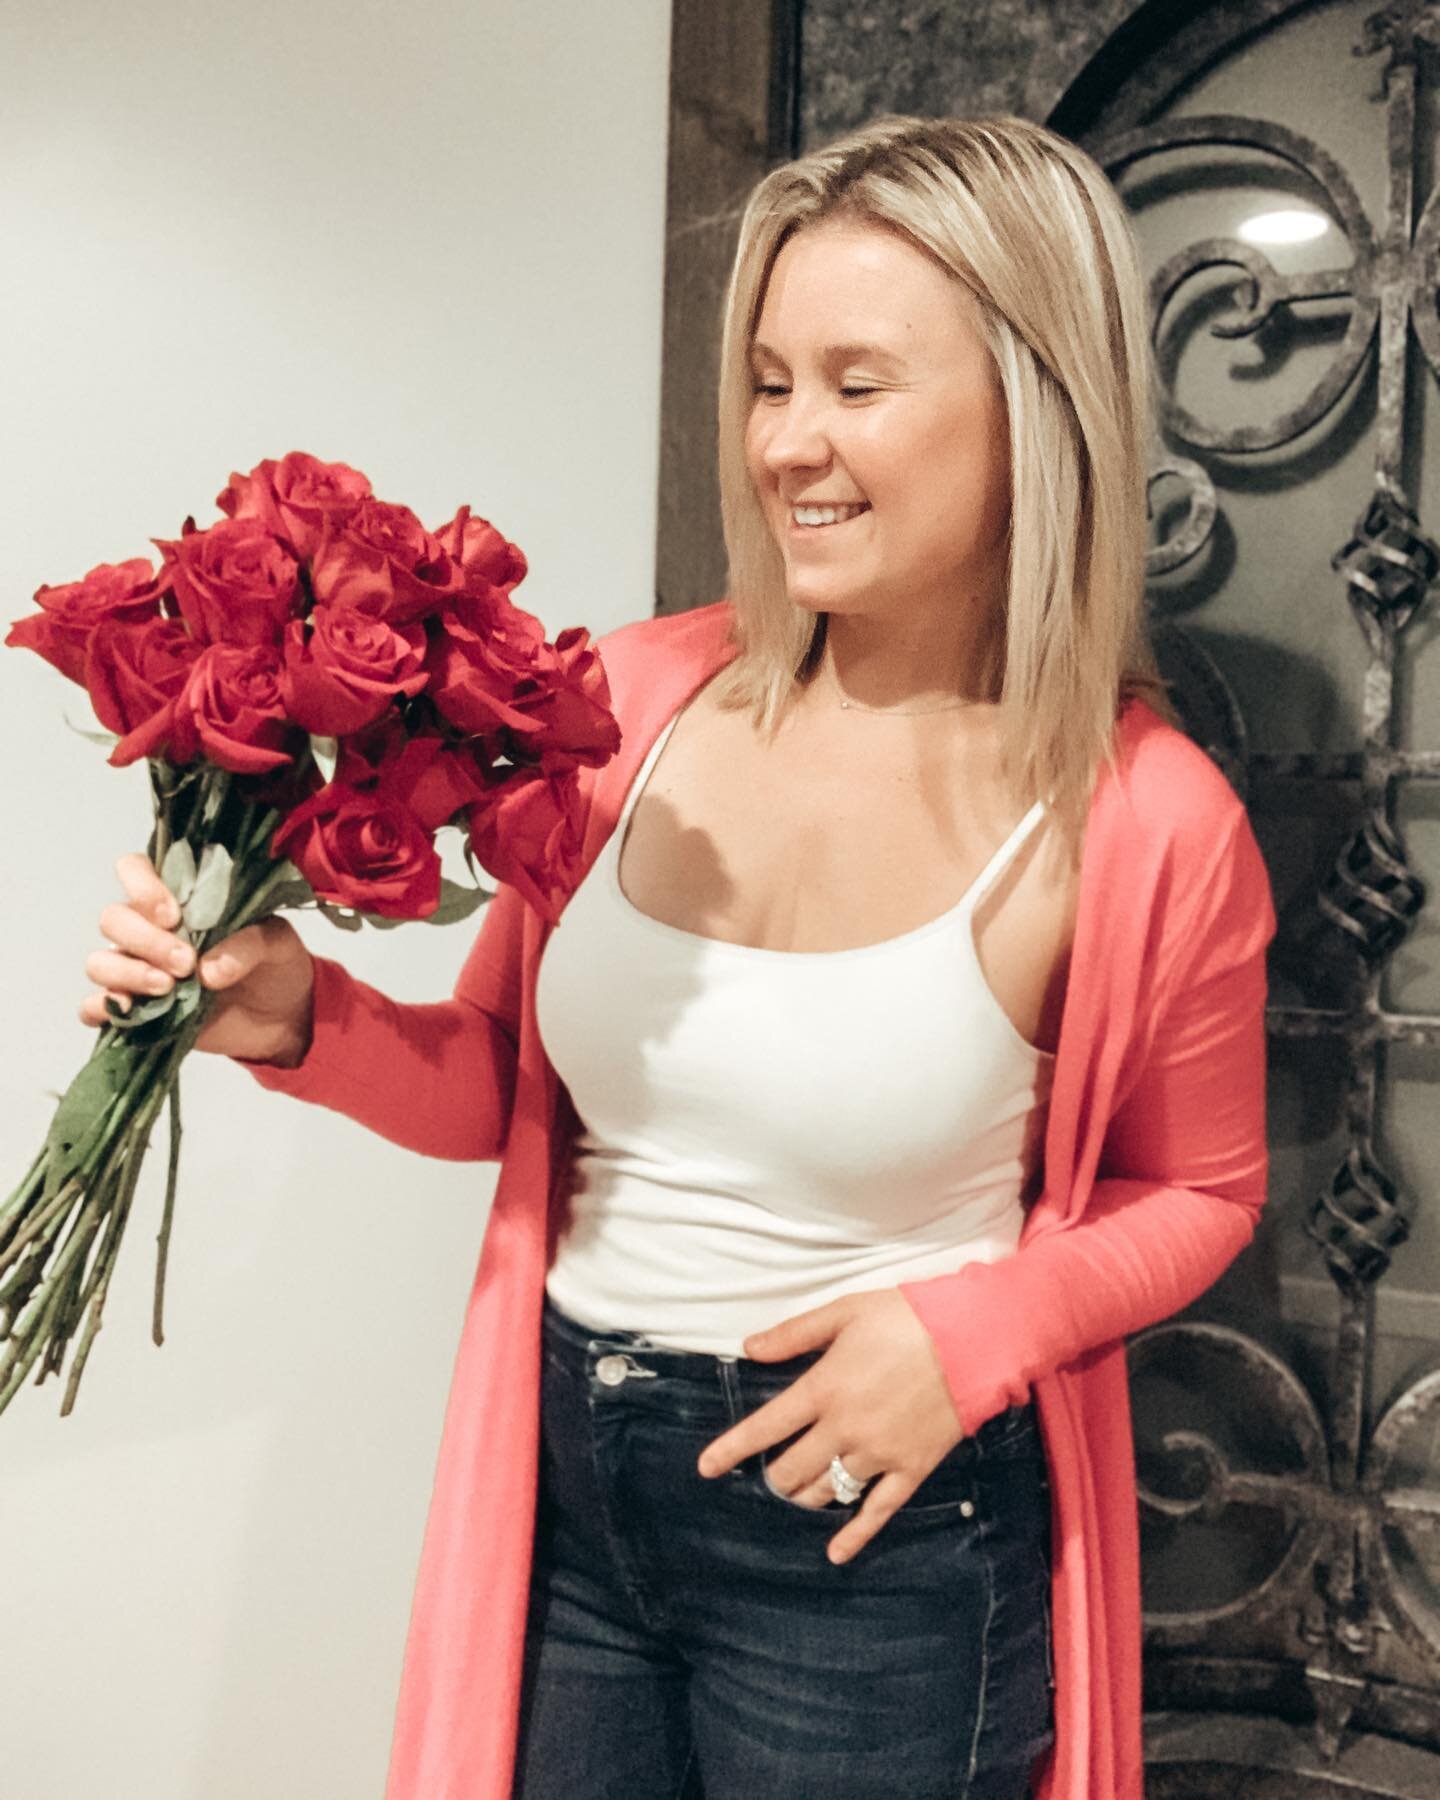 Flowers are my ultimate LOVE LANGUAGE❣️ &amp; these flowers from my handsome Valentine are opening so beautifully! 🌹
&bull;
&bull;
&bull;
&bull;
&bull;
#sippnsunshine #motherdaughter #ohio #OH #Cbus #PA #pittsburgh #Pennsylvania #columbus #lifestyle